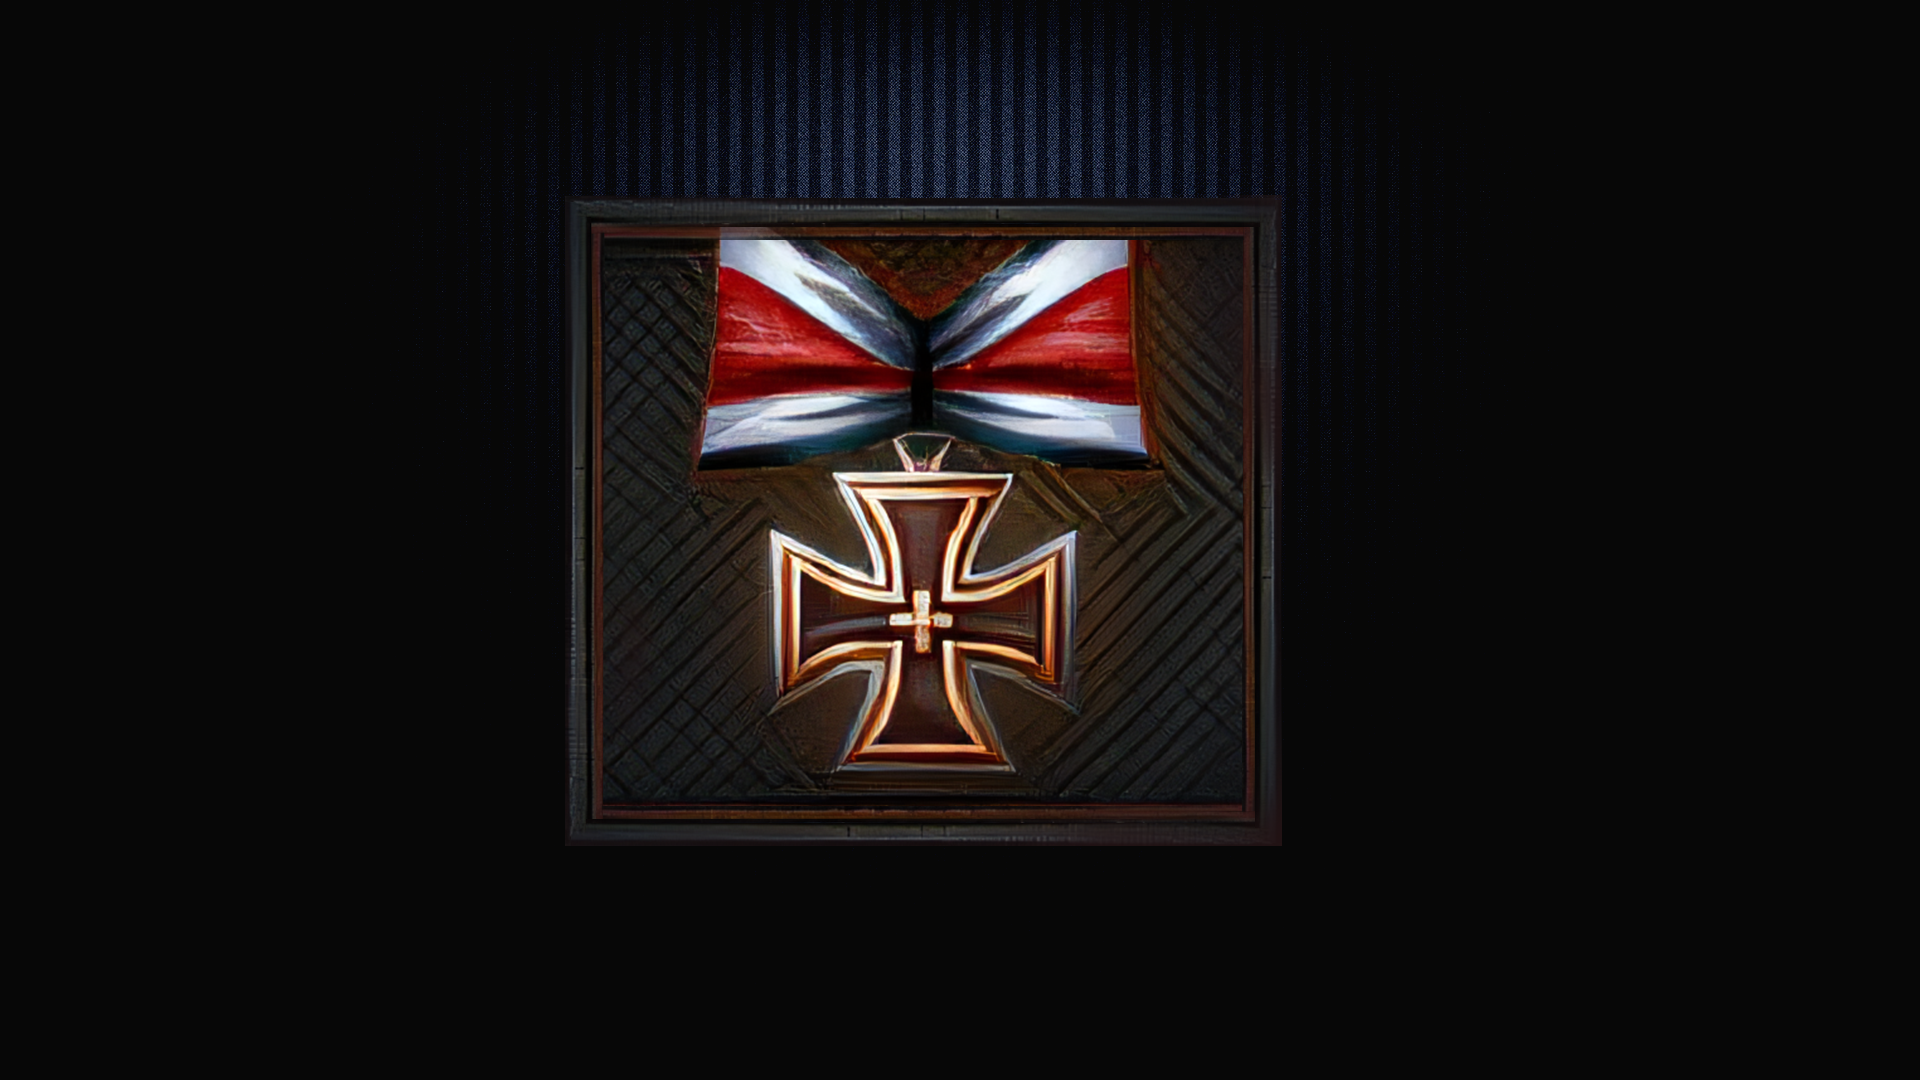 Icon for Knight Cross of the Iron Cross